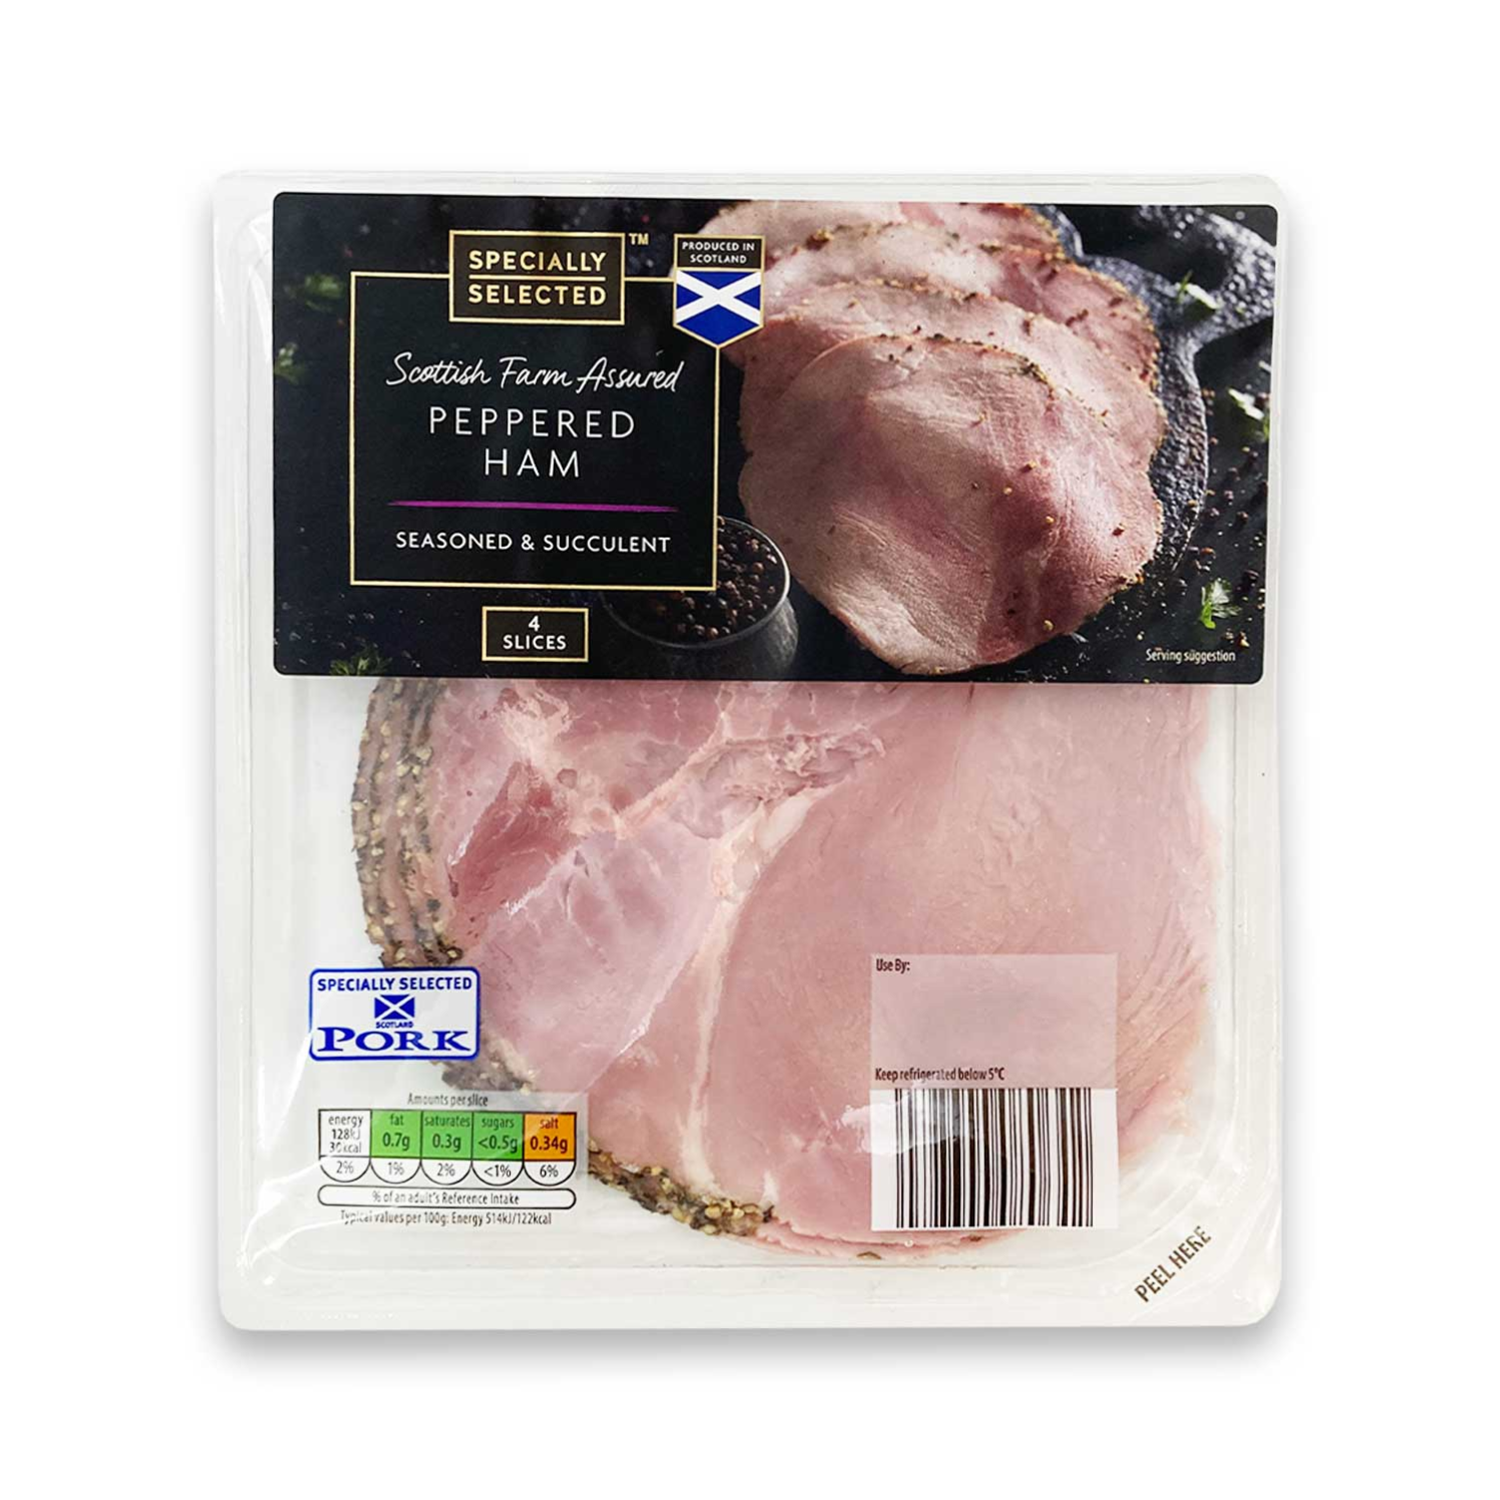 Specially Selected Scottish Farm Assured Peppered Ham 100g | ALDI